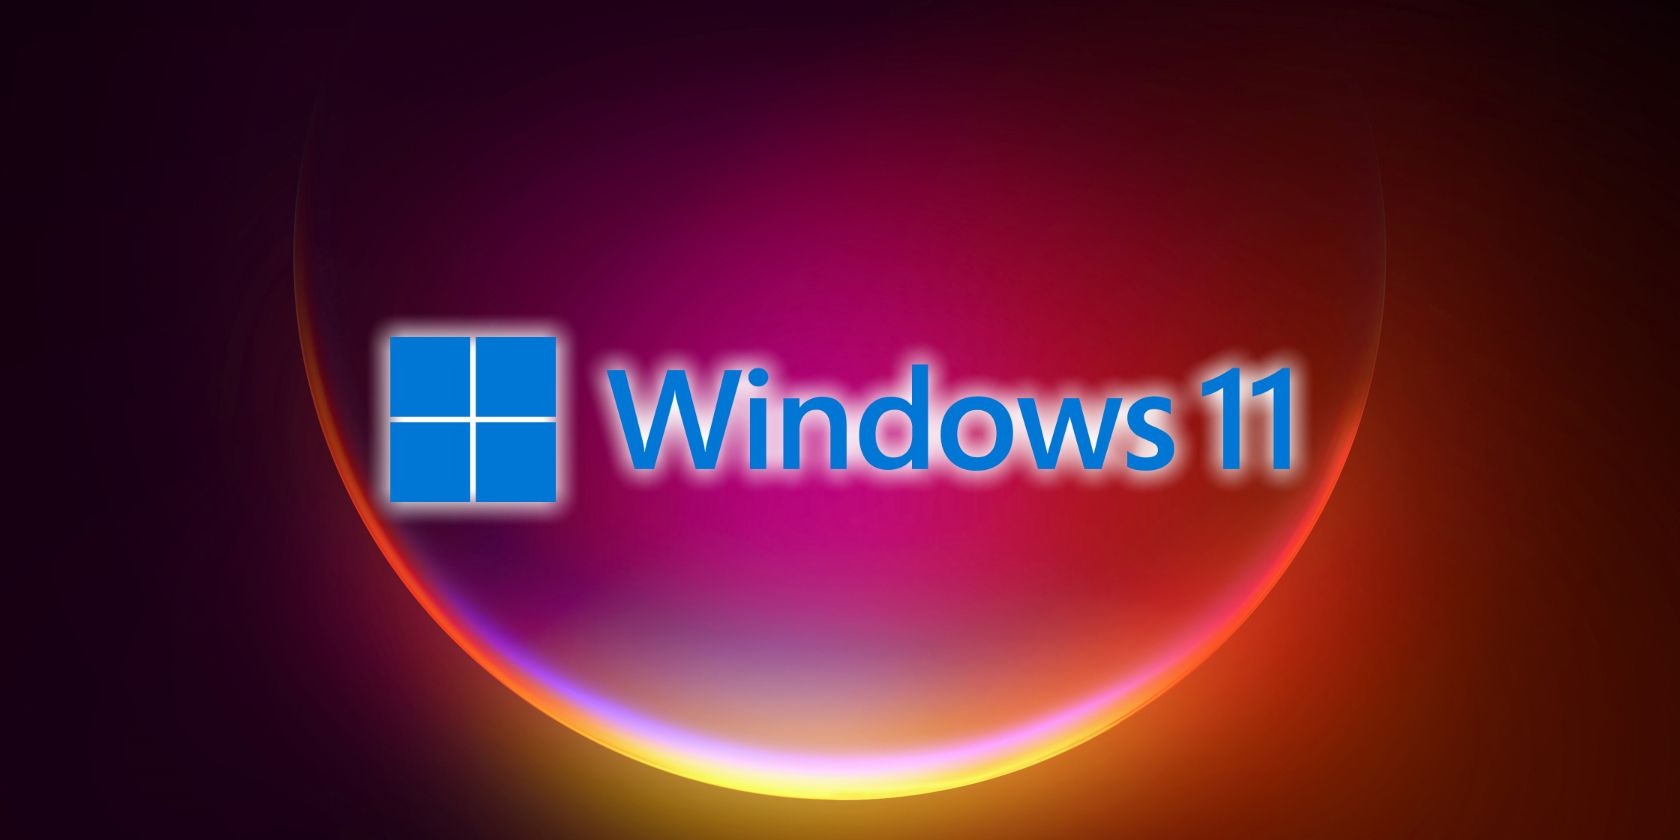 where can i download windows 11